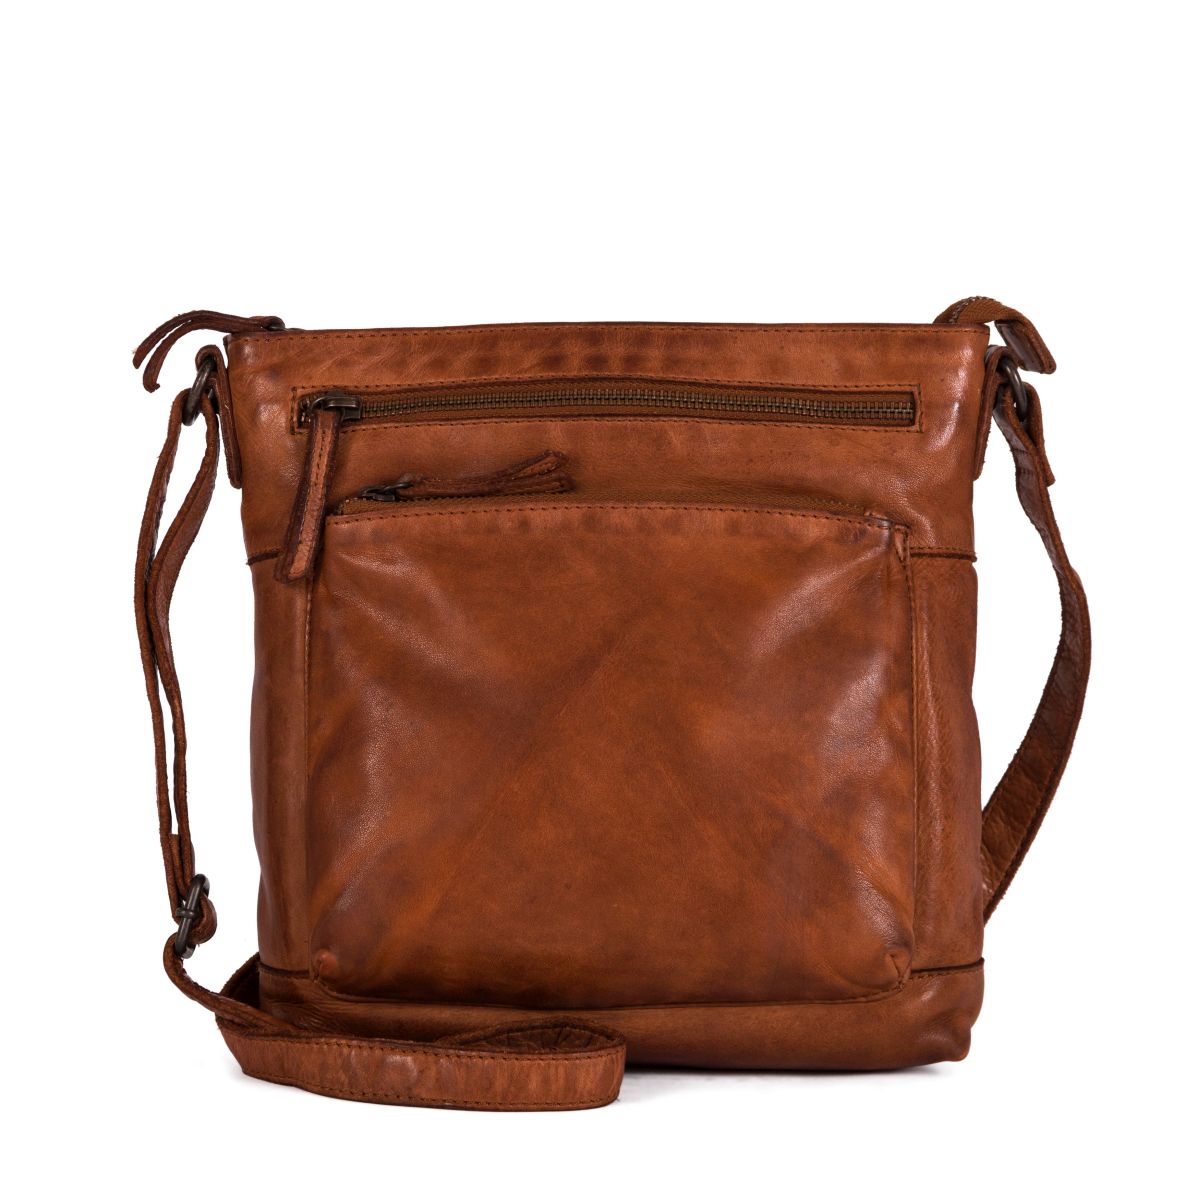 Brown leather crossbody bag with front zipper pockets and adjustable strap